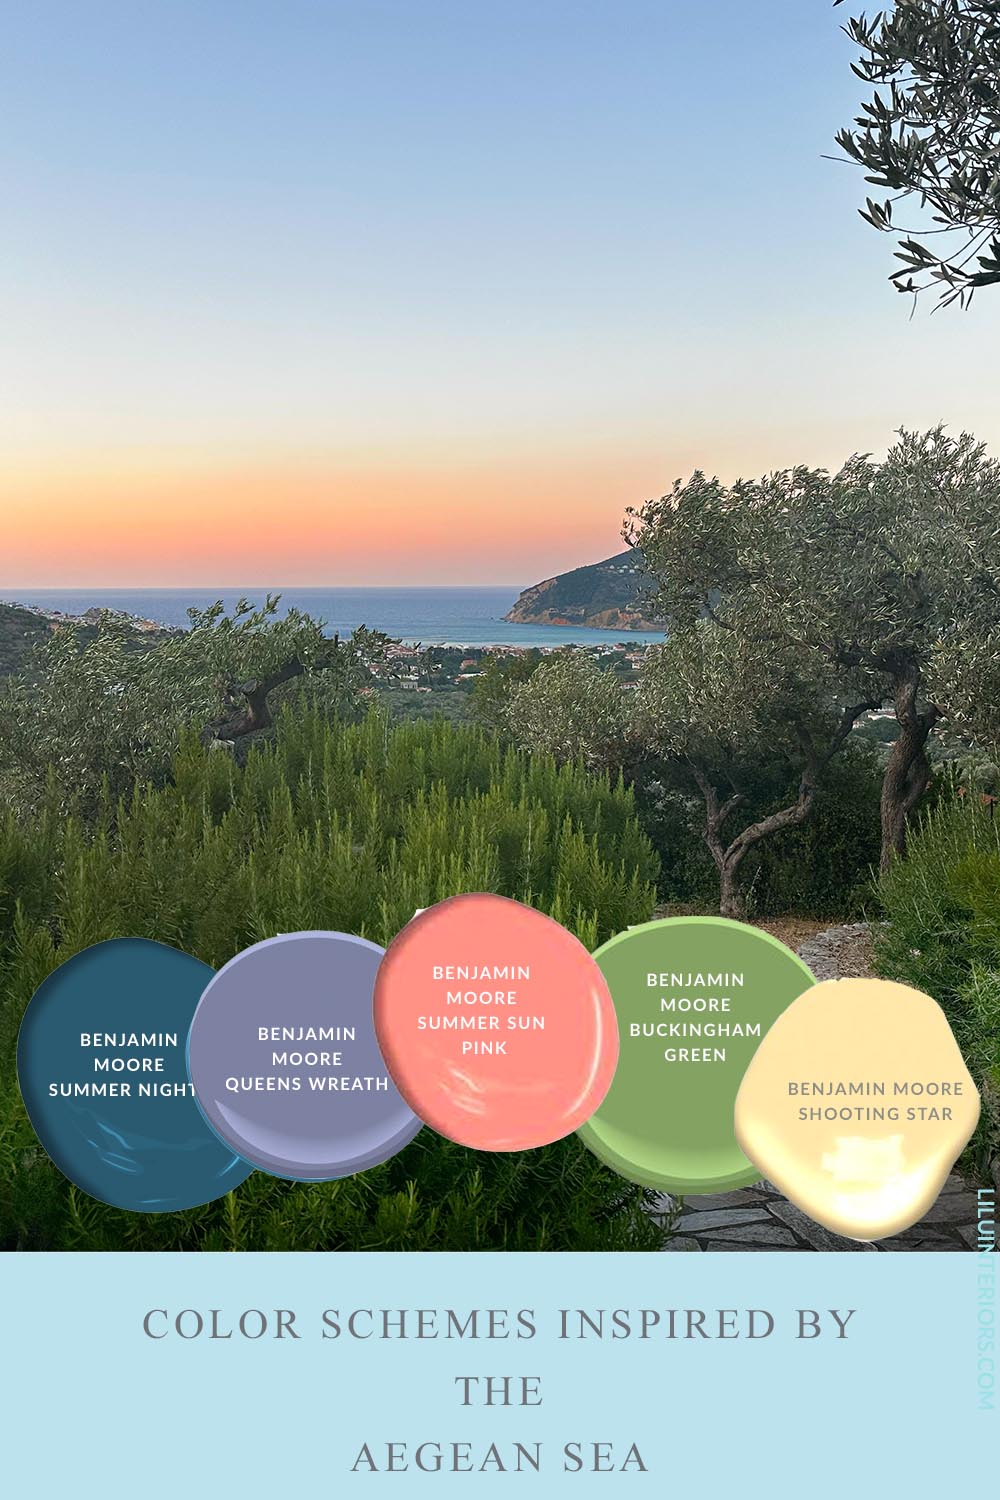 Color Schemes Inspired By The Aegean Sea: My Recent Trip To Greece And The Island Of Skopelos Inspired Me To Create Fresh Nature Inspired Color Palettes For Your Home. #colorpalette #colorscheme #natureinspired #homecolors #interiorcolors #interiordesign